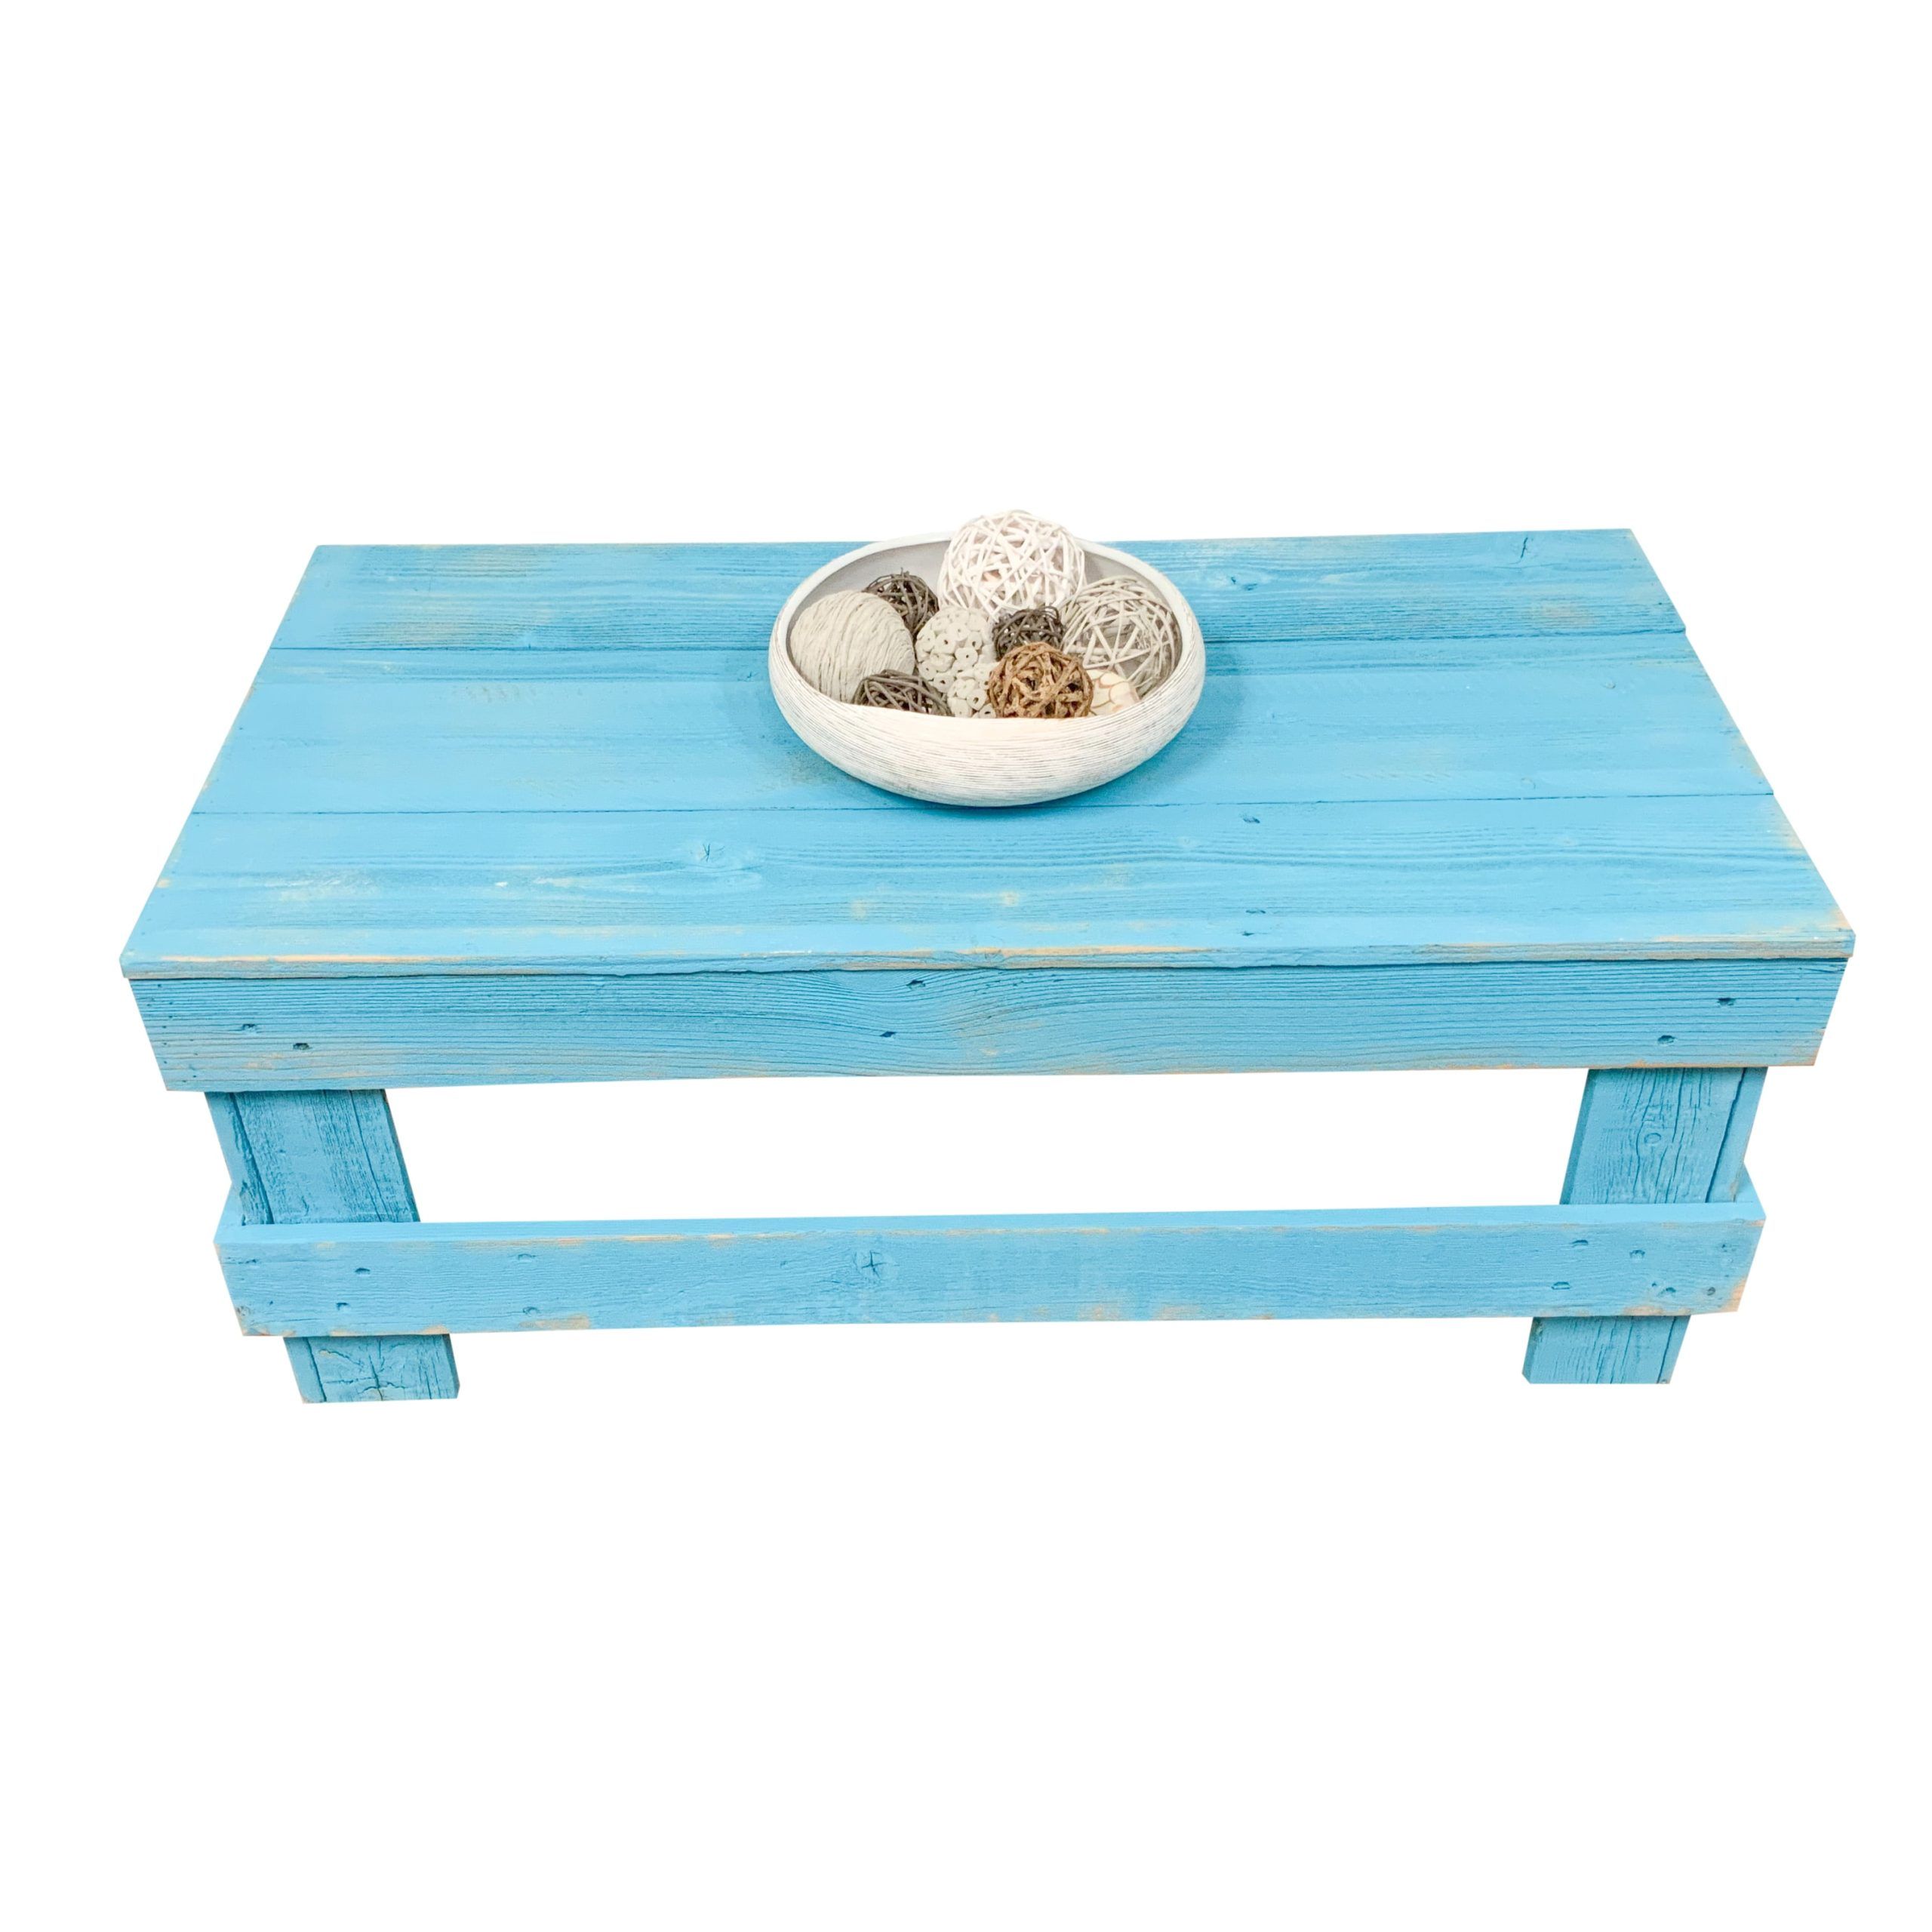 Woven Paths Reclaimed Wood Coffee Table, Turquoise – Walmart For Woven Paths Coffee Tables (View 10 of 20)